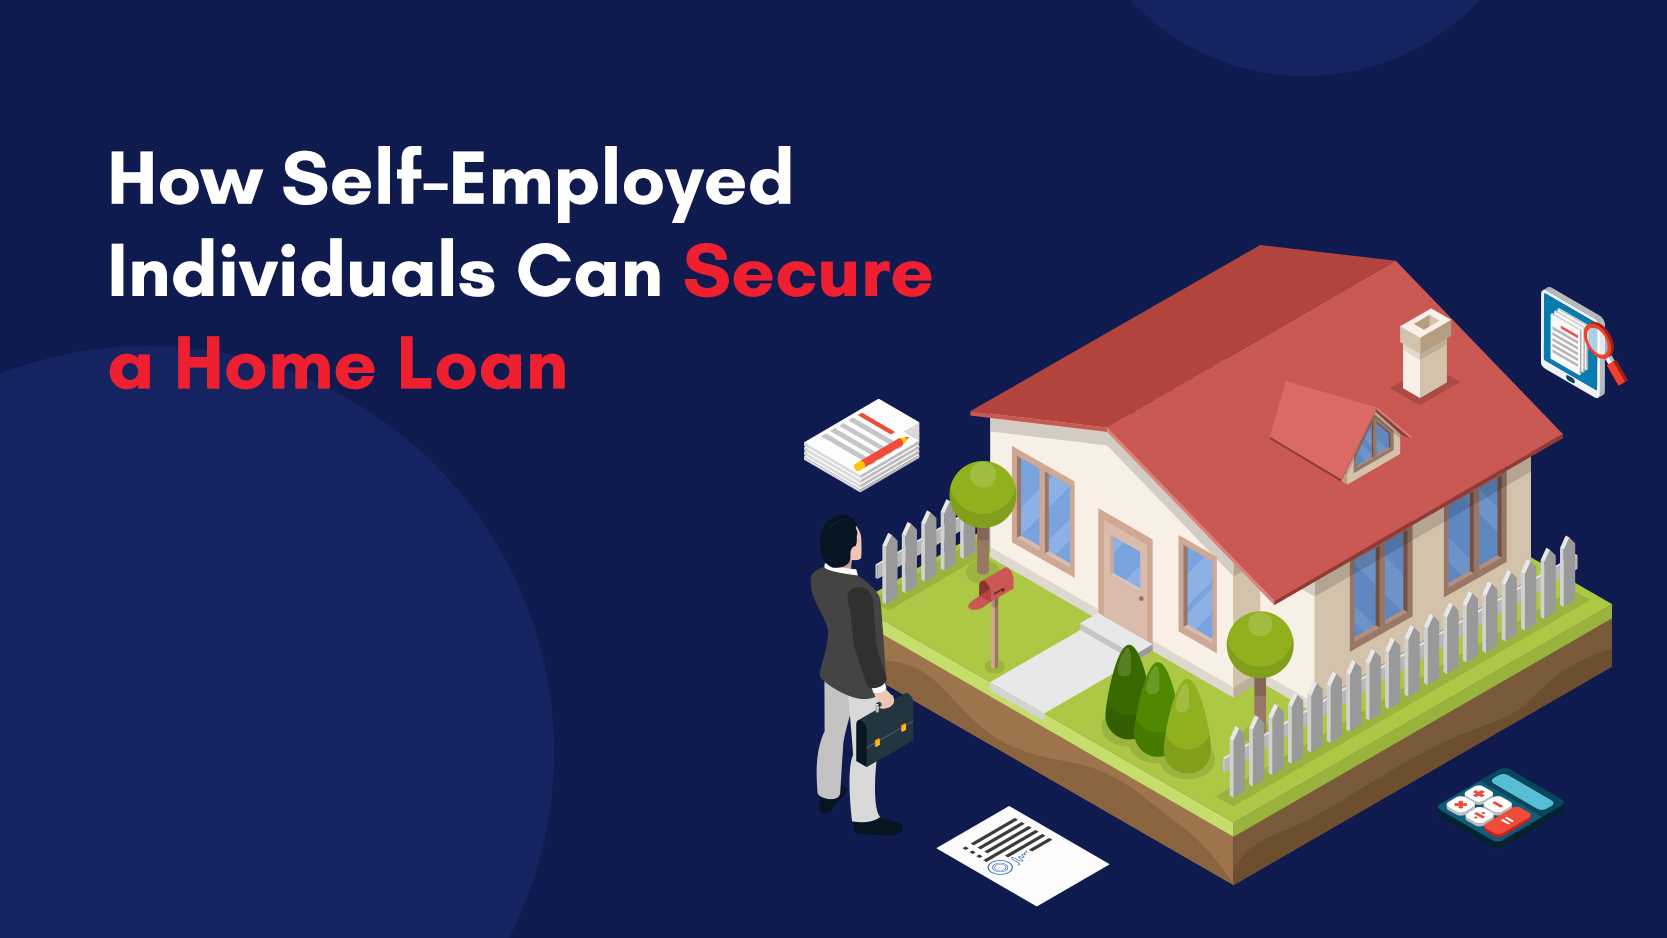 How Self-Employed Individuals Can Secure a Home Loan